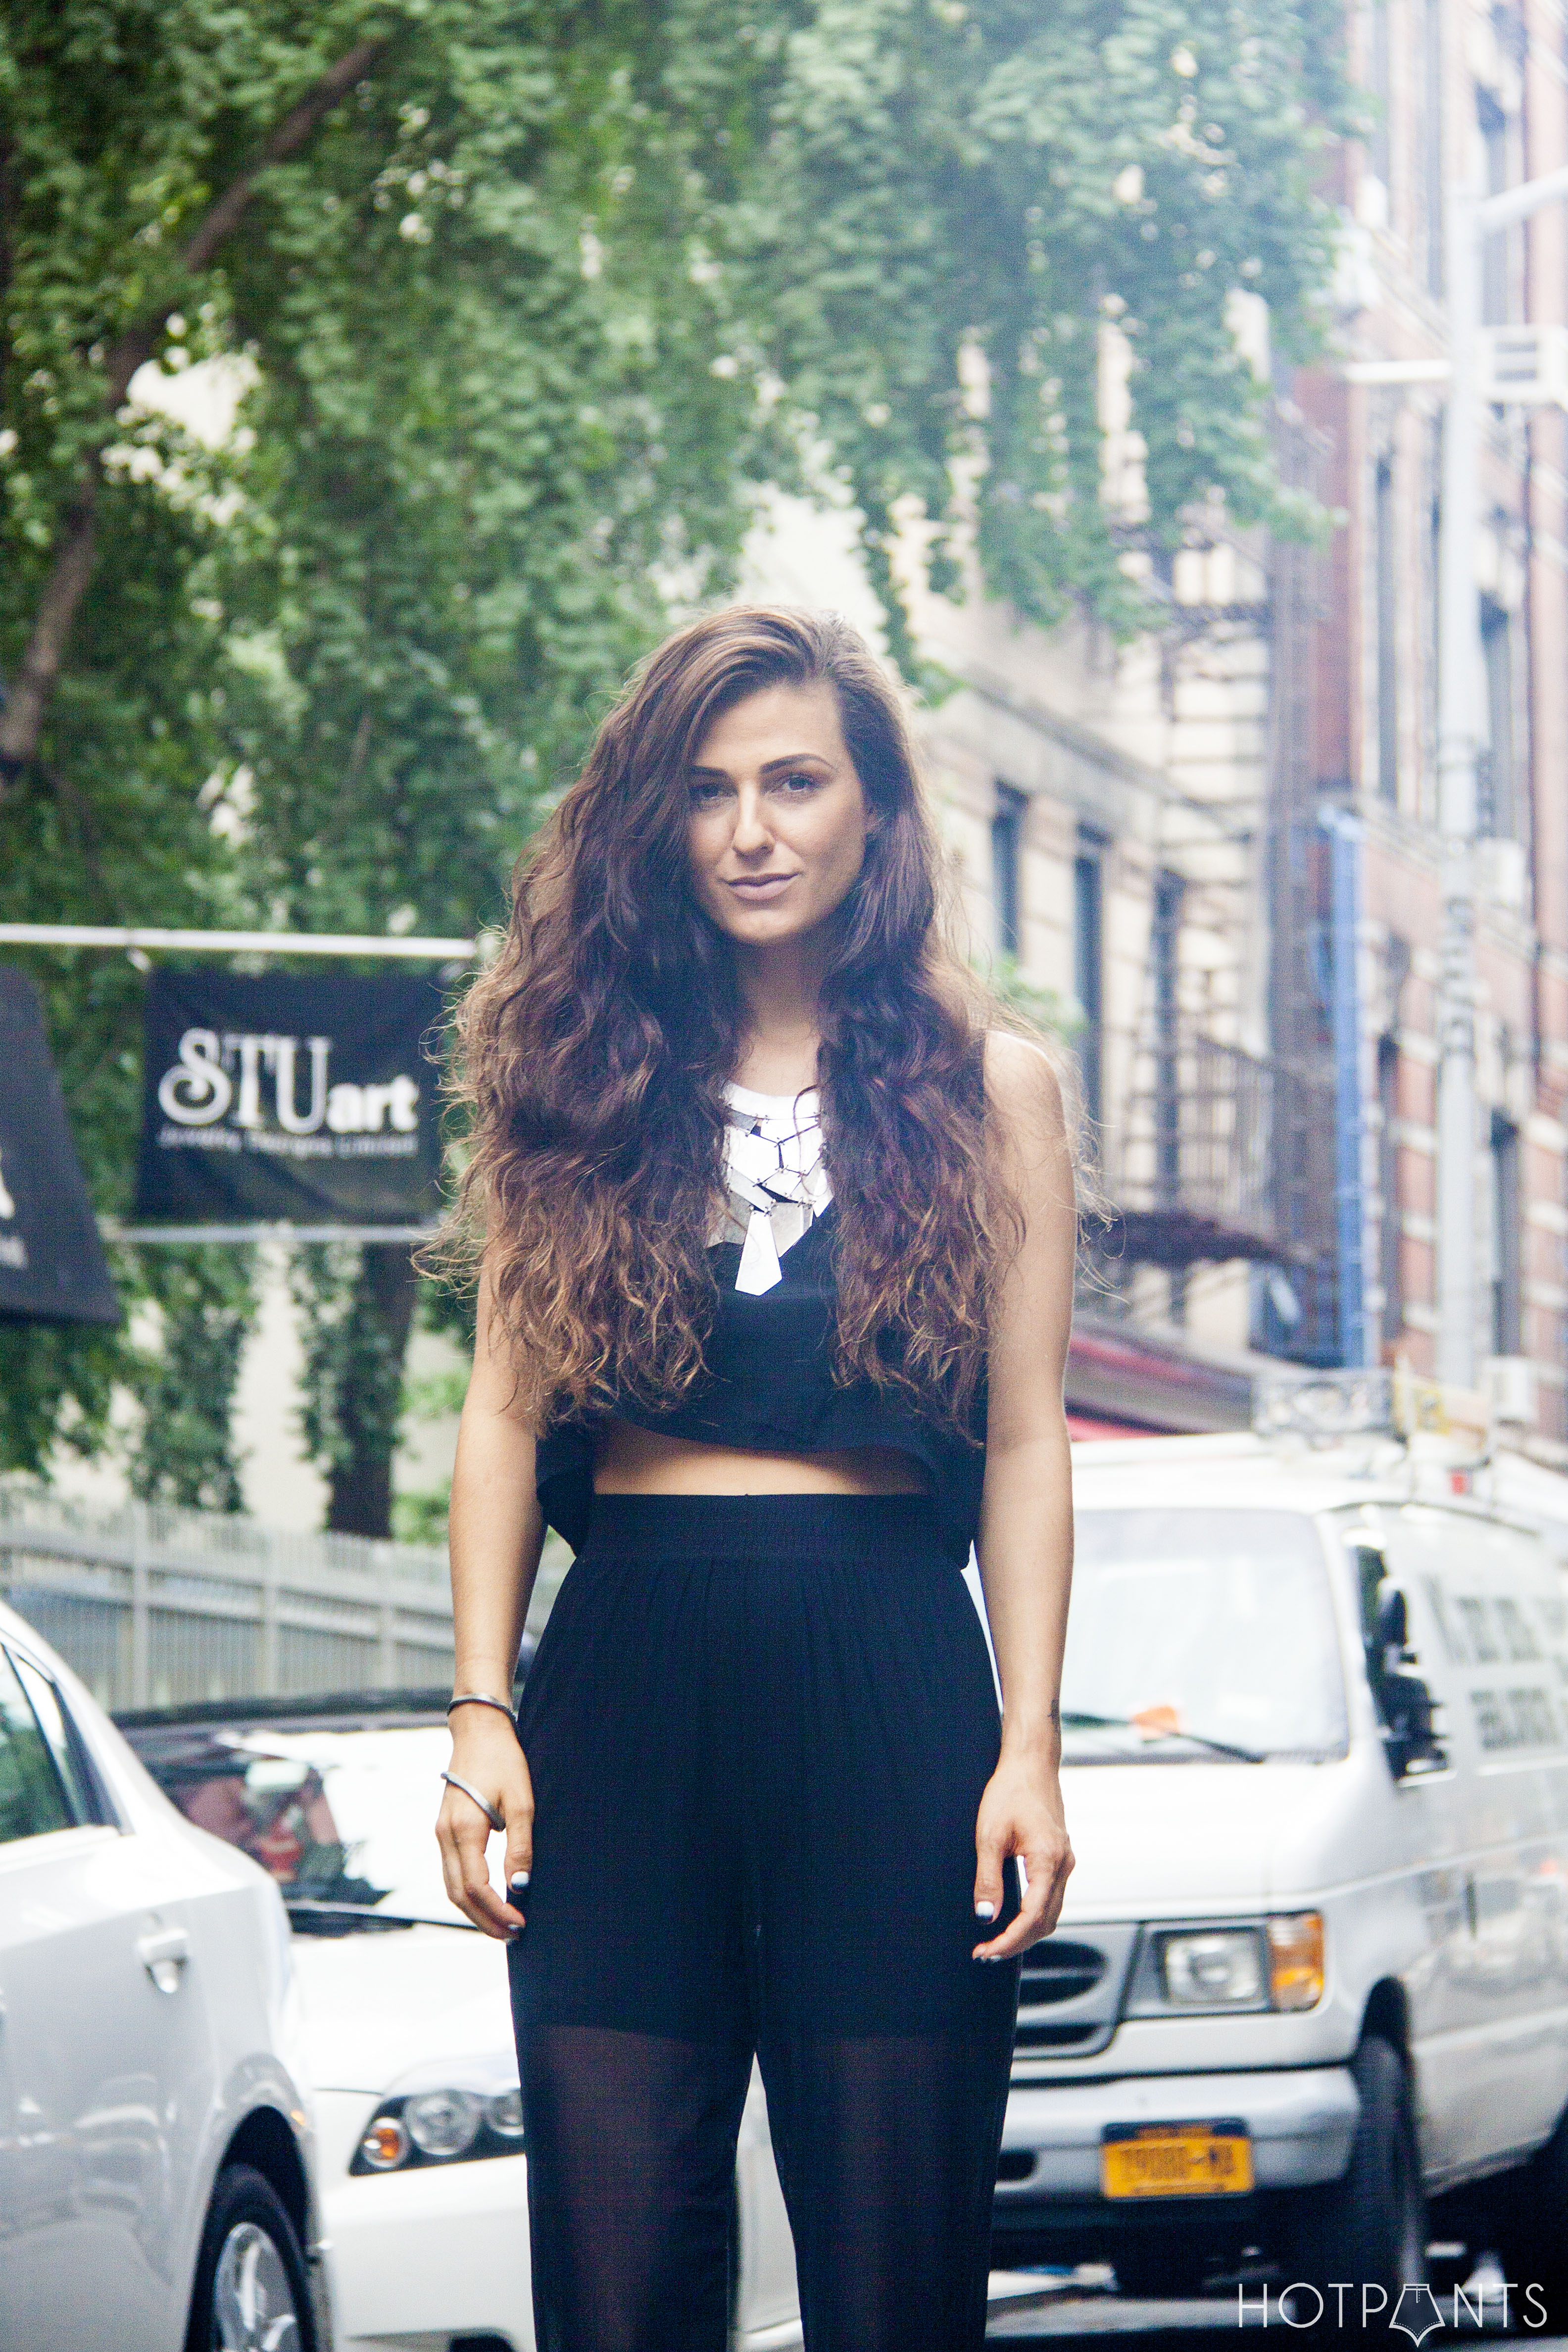 Silver Statement Necklace Crop Top NYC Summer Streetstyle